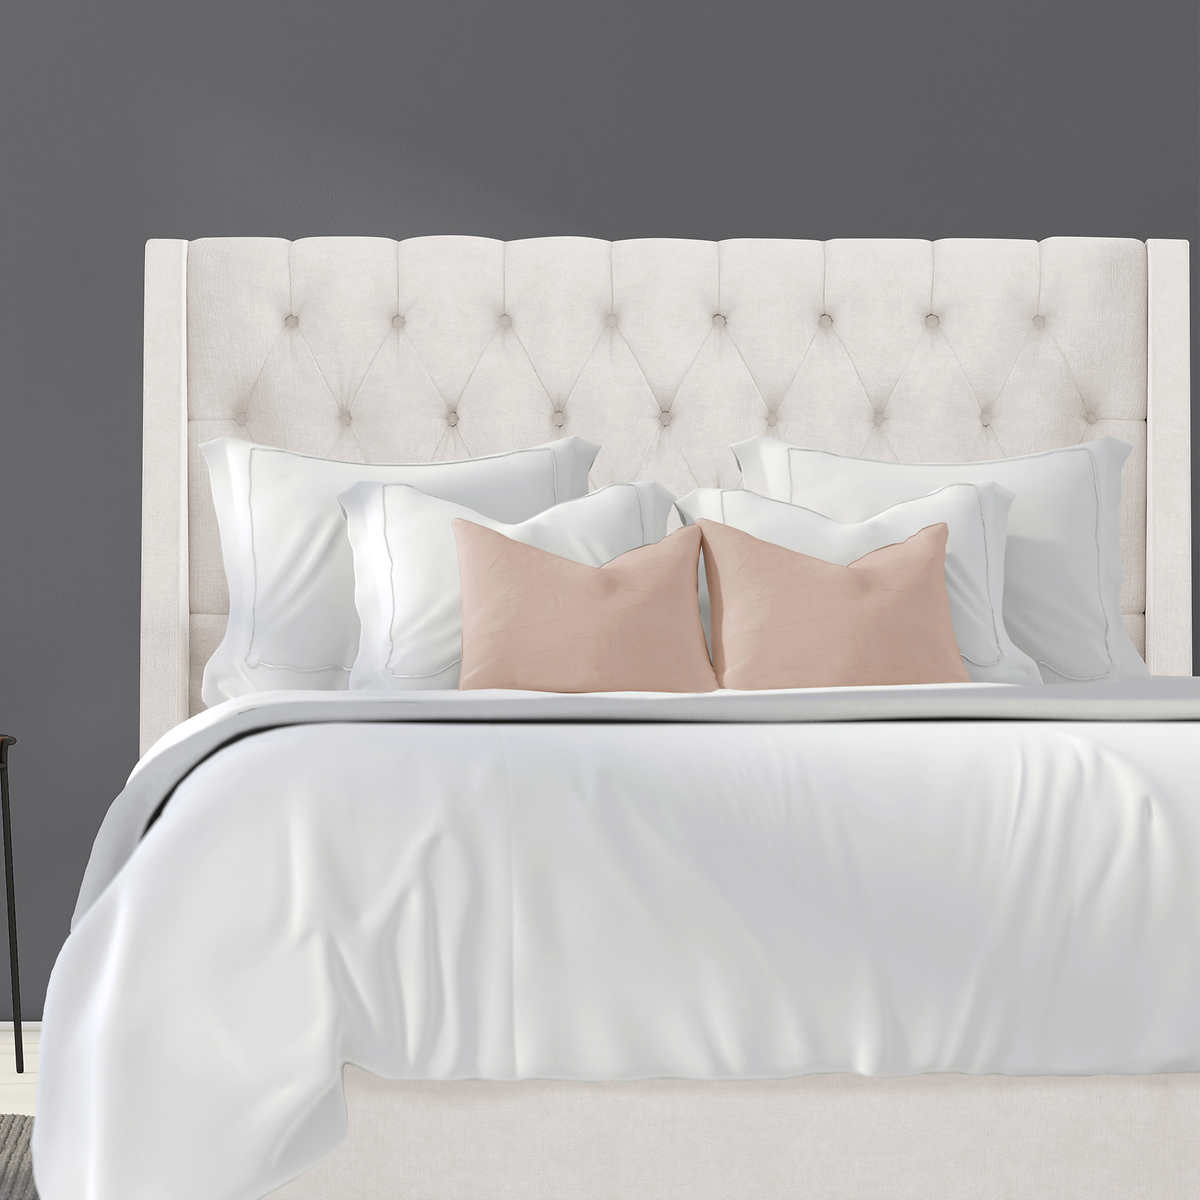 Thorton Tufted Wingback King Bed Costco, White Upholstered King Bed